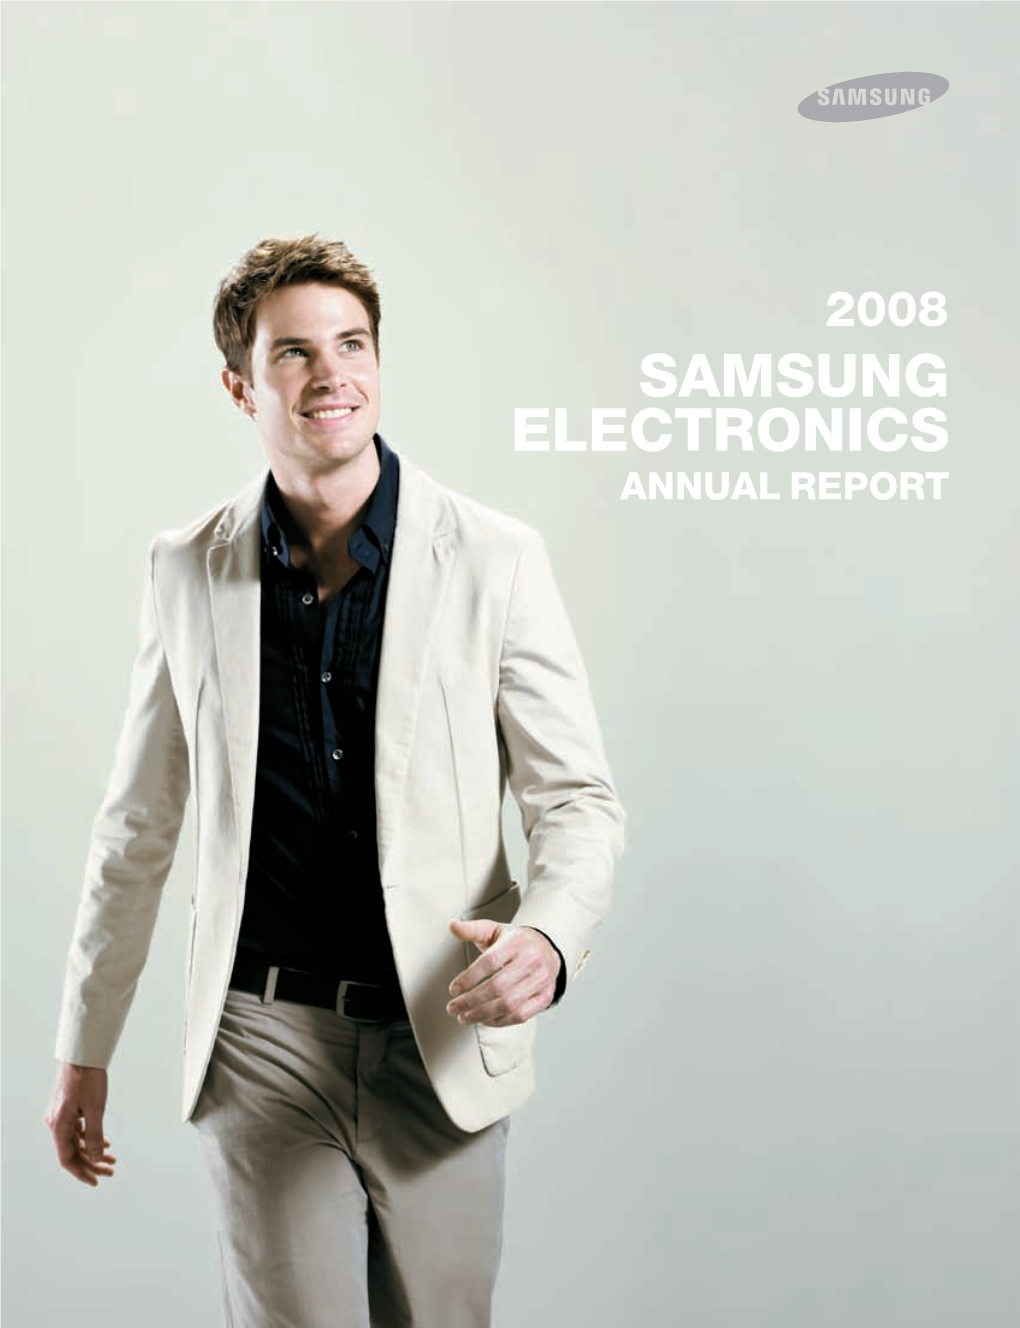 ANNUAL REPORT Contents